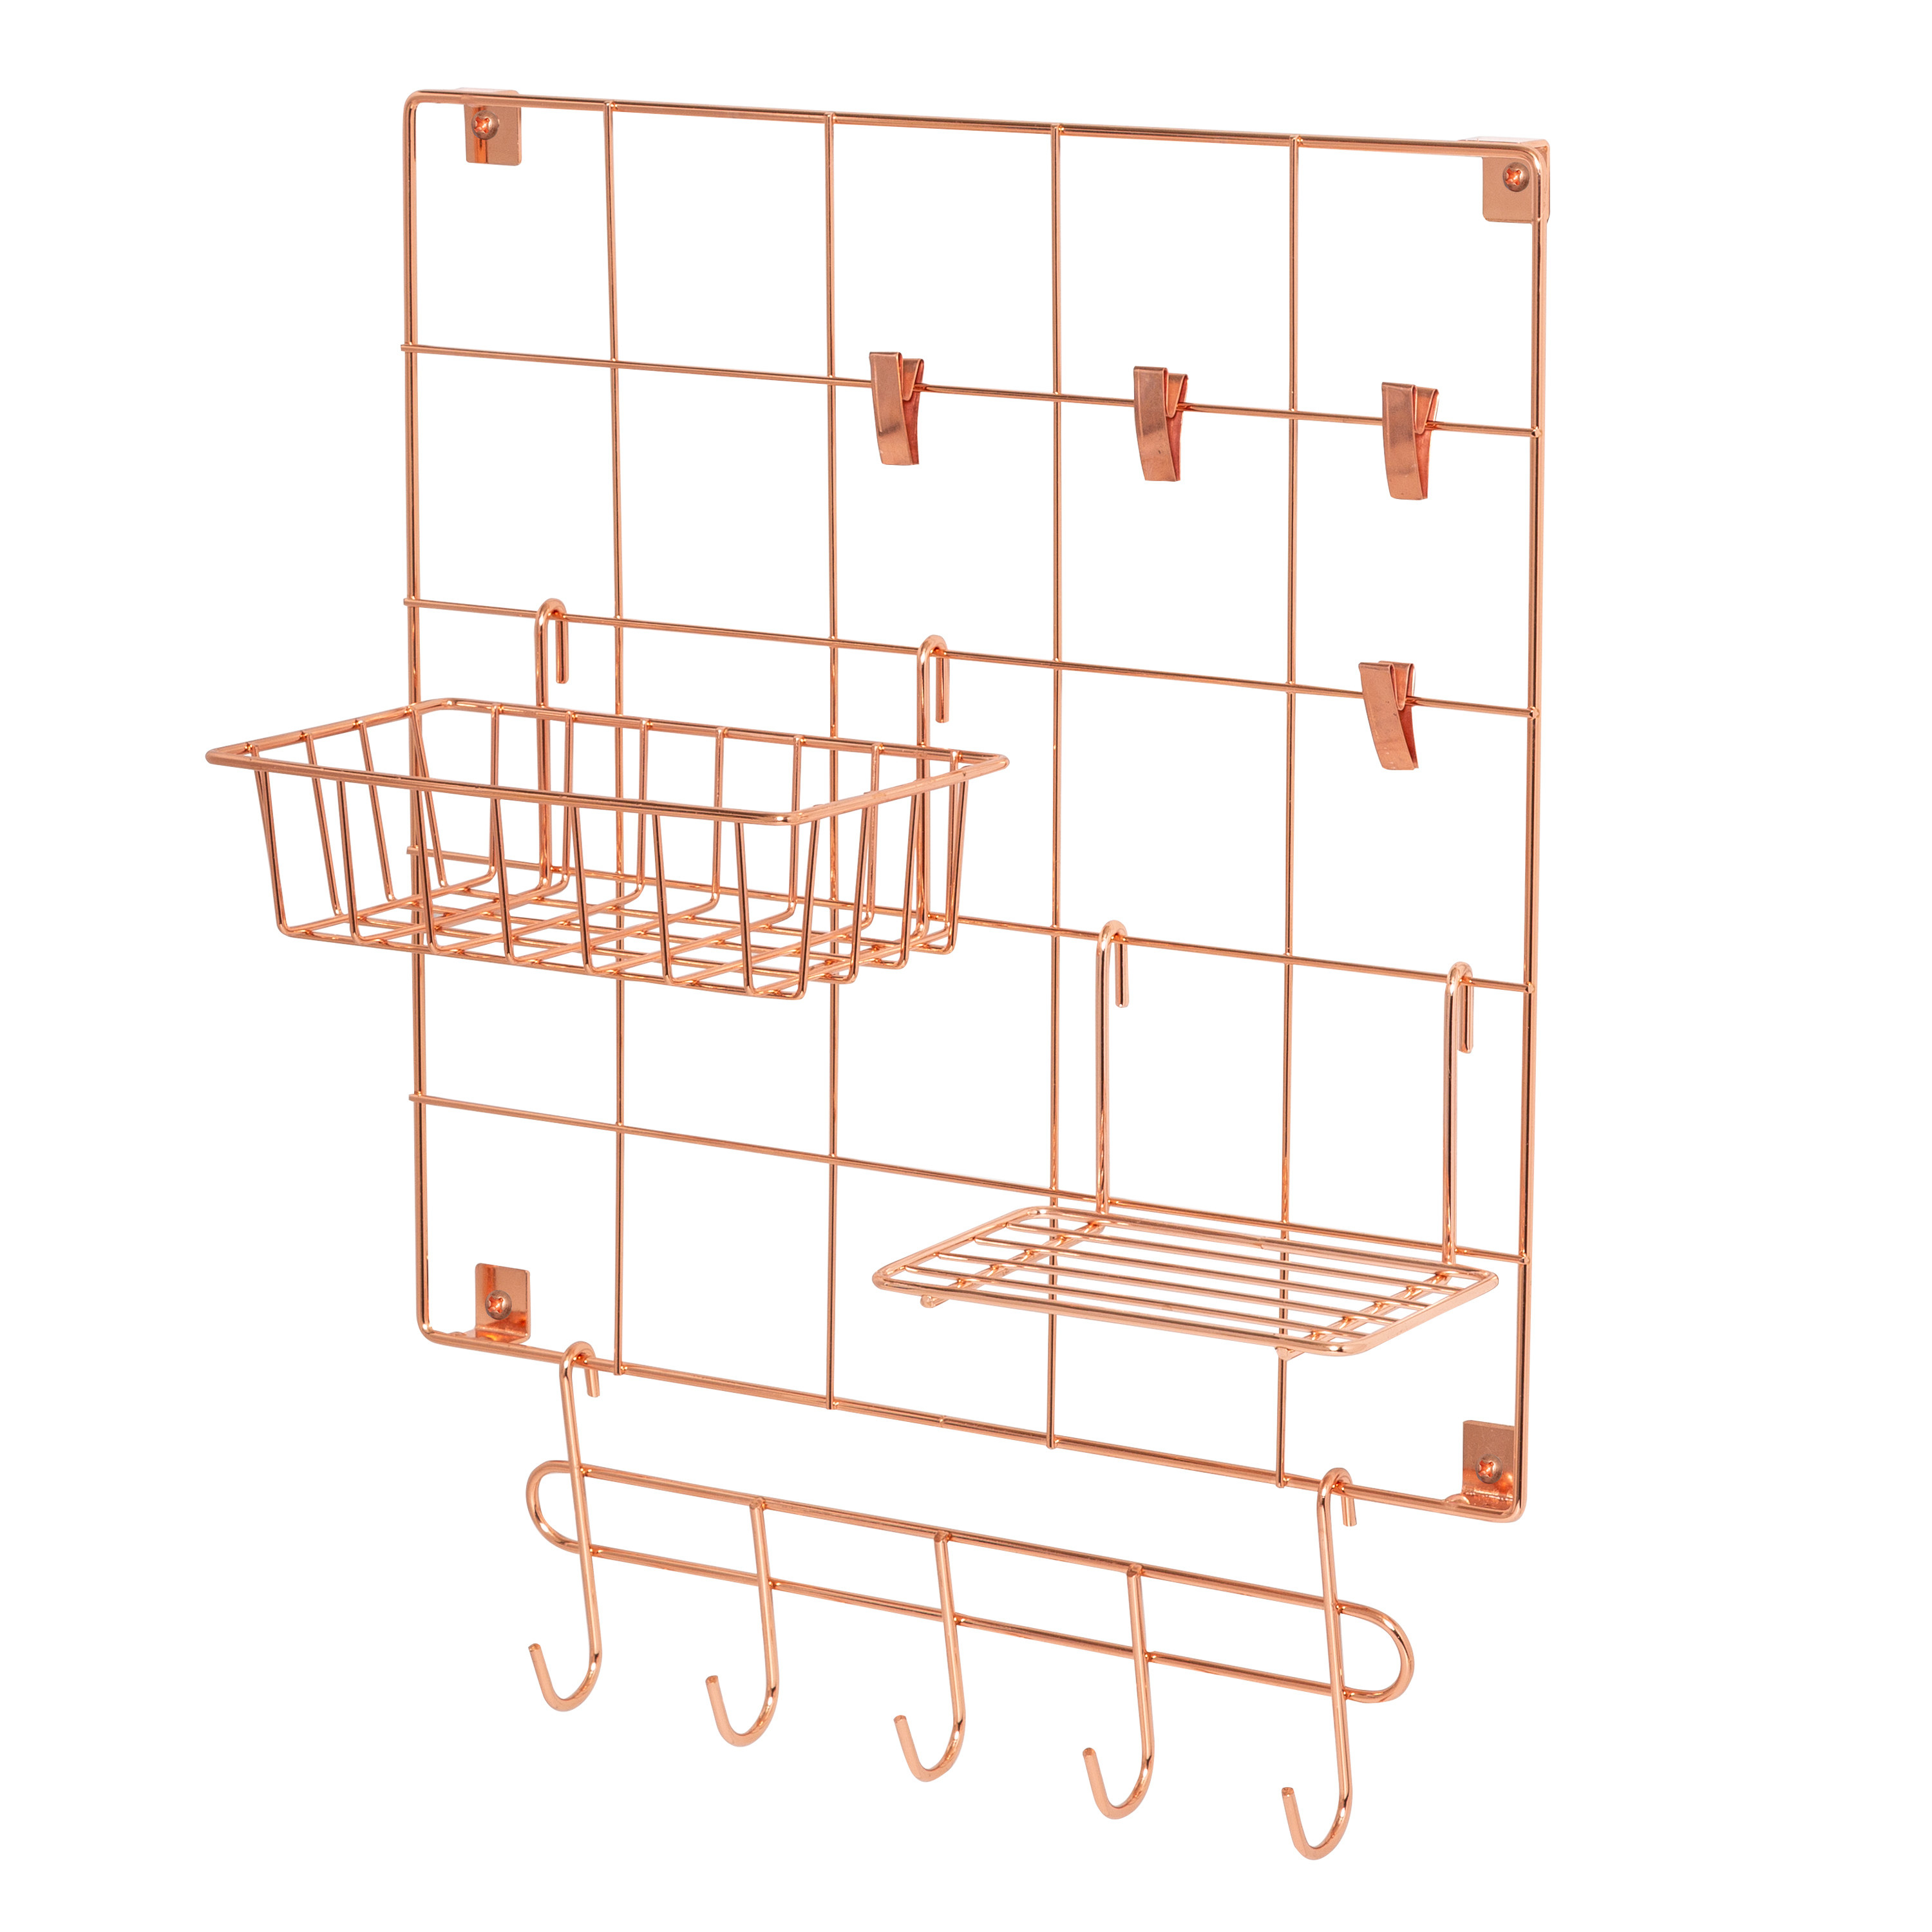 A copper wire organizer with hooks, a basket, and shelf